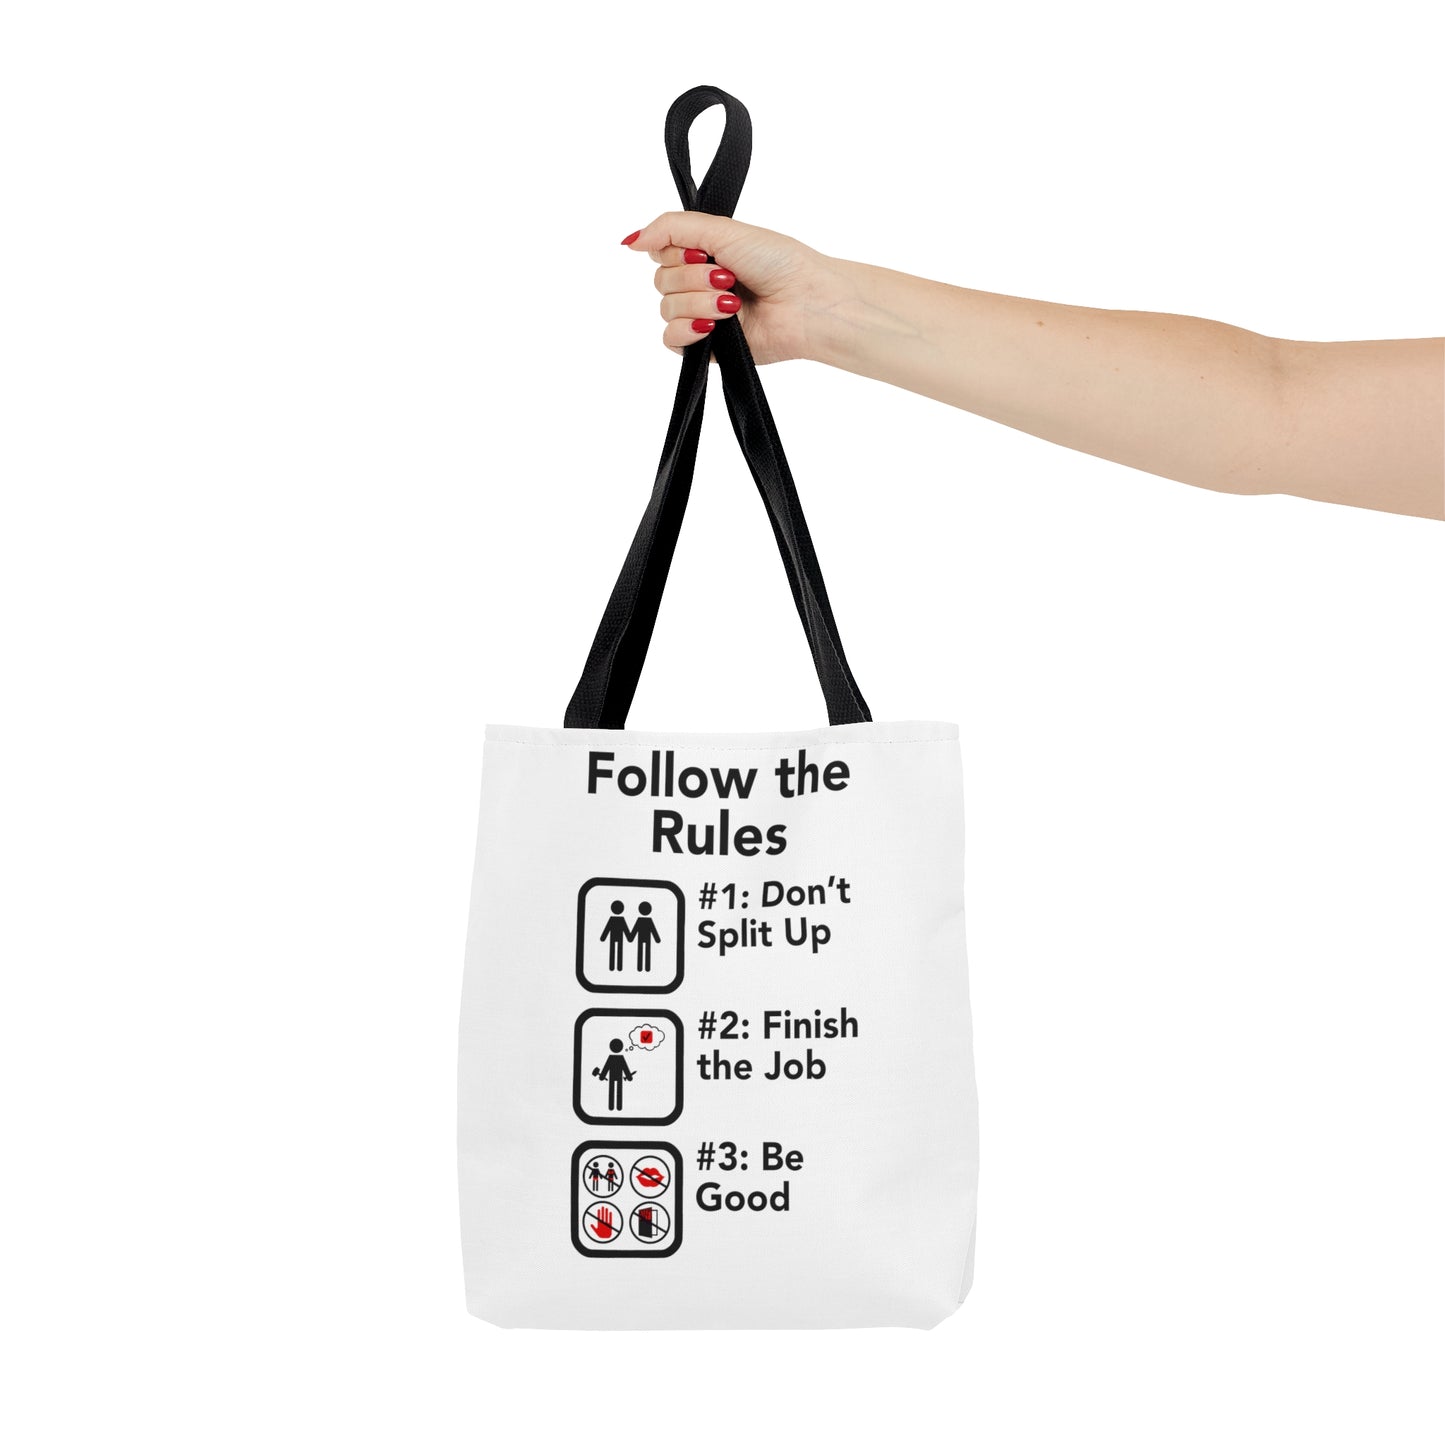 The Rules Tote Bag